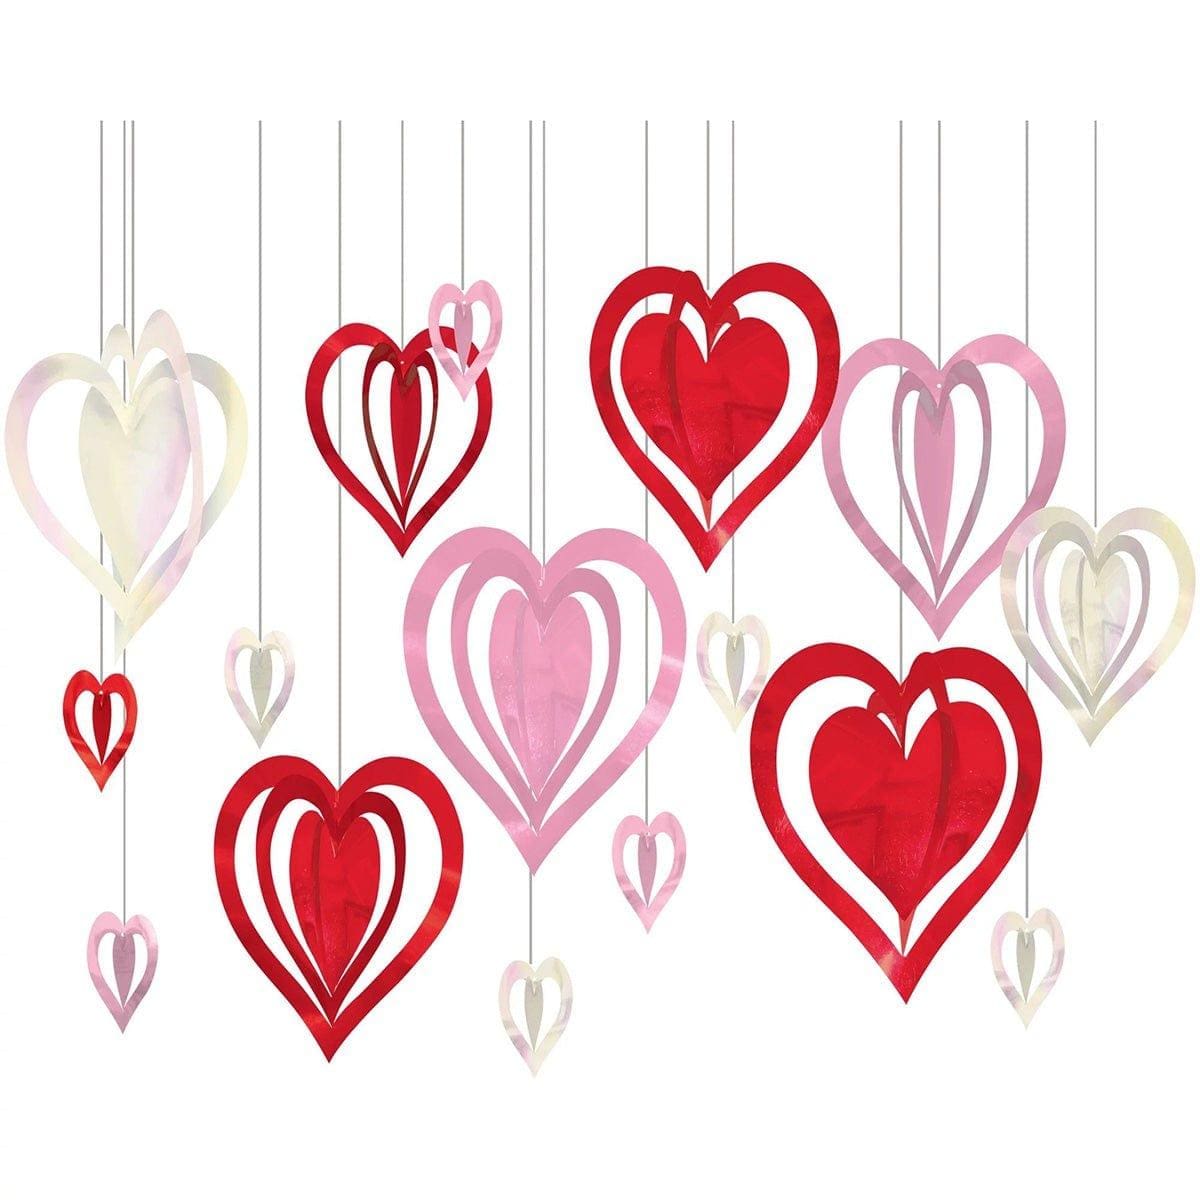 AMSCAN CA Valentine's Day Valentine's Day Hearts Decoration Kit, 16 Count